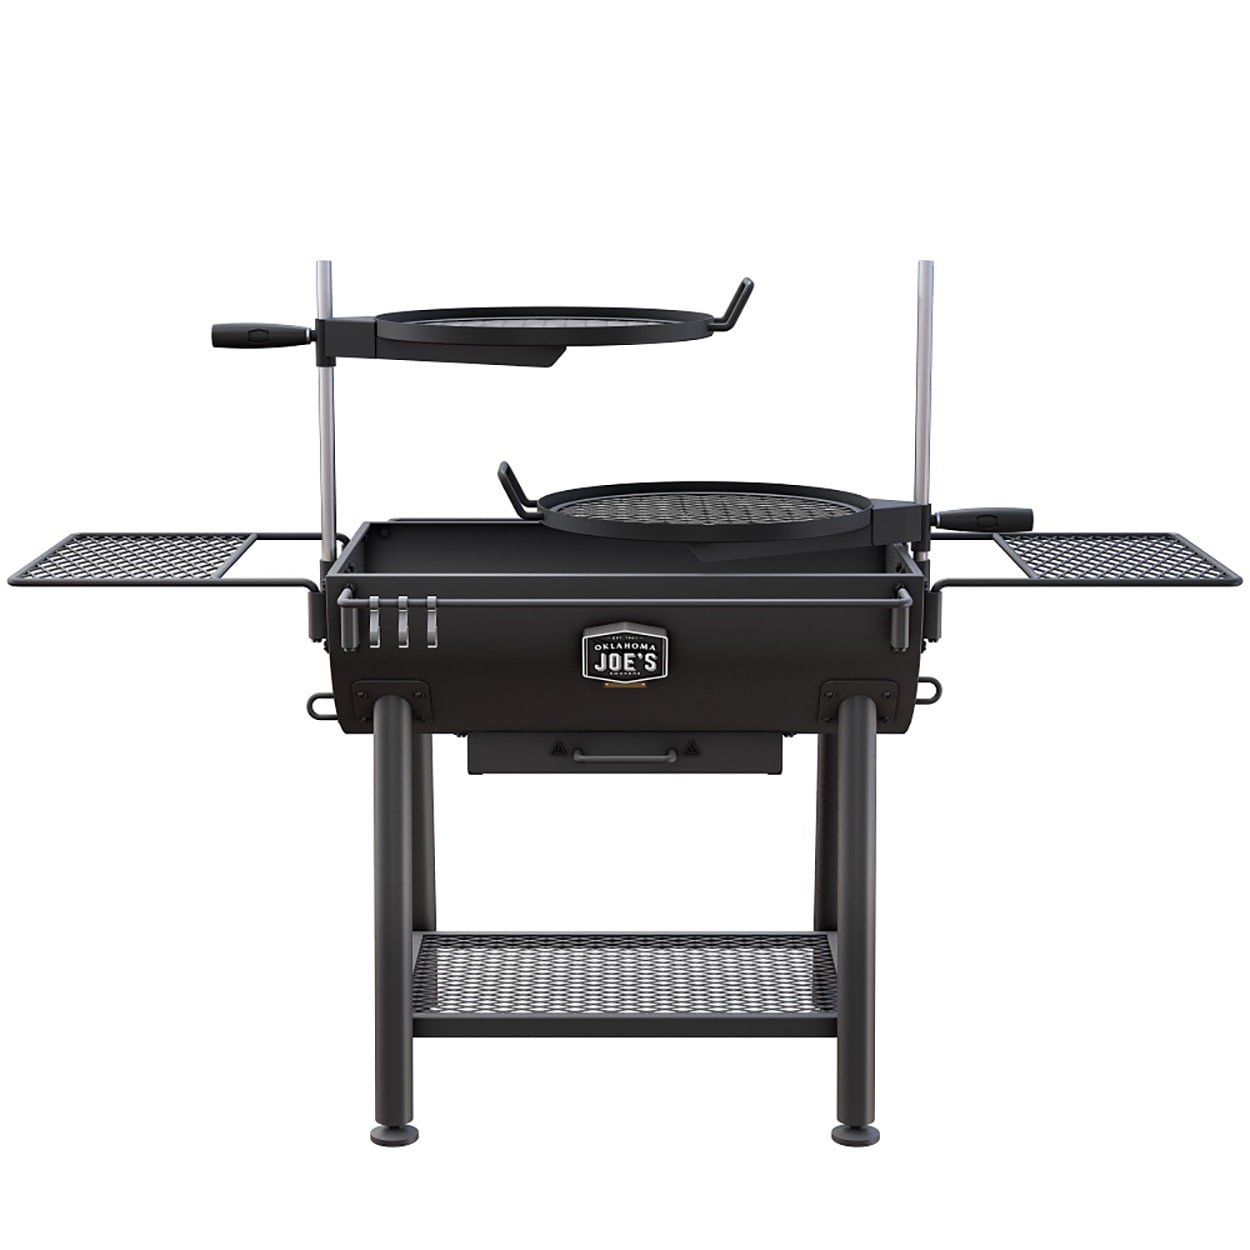 Save up to $150 on a refurb Ninja Woodfire grill and smoker today